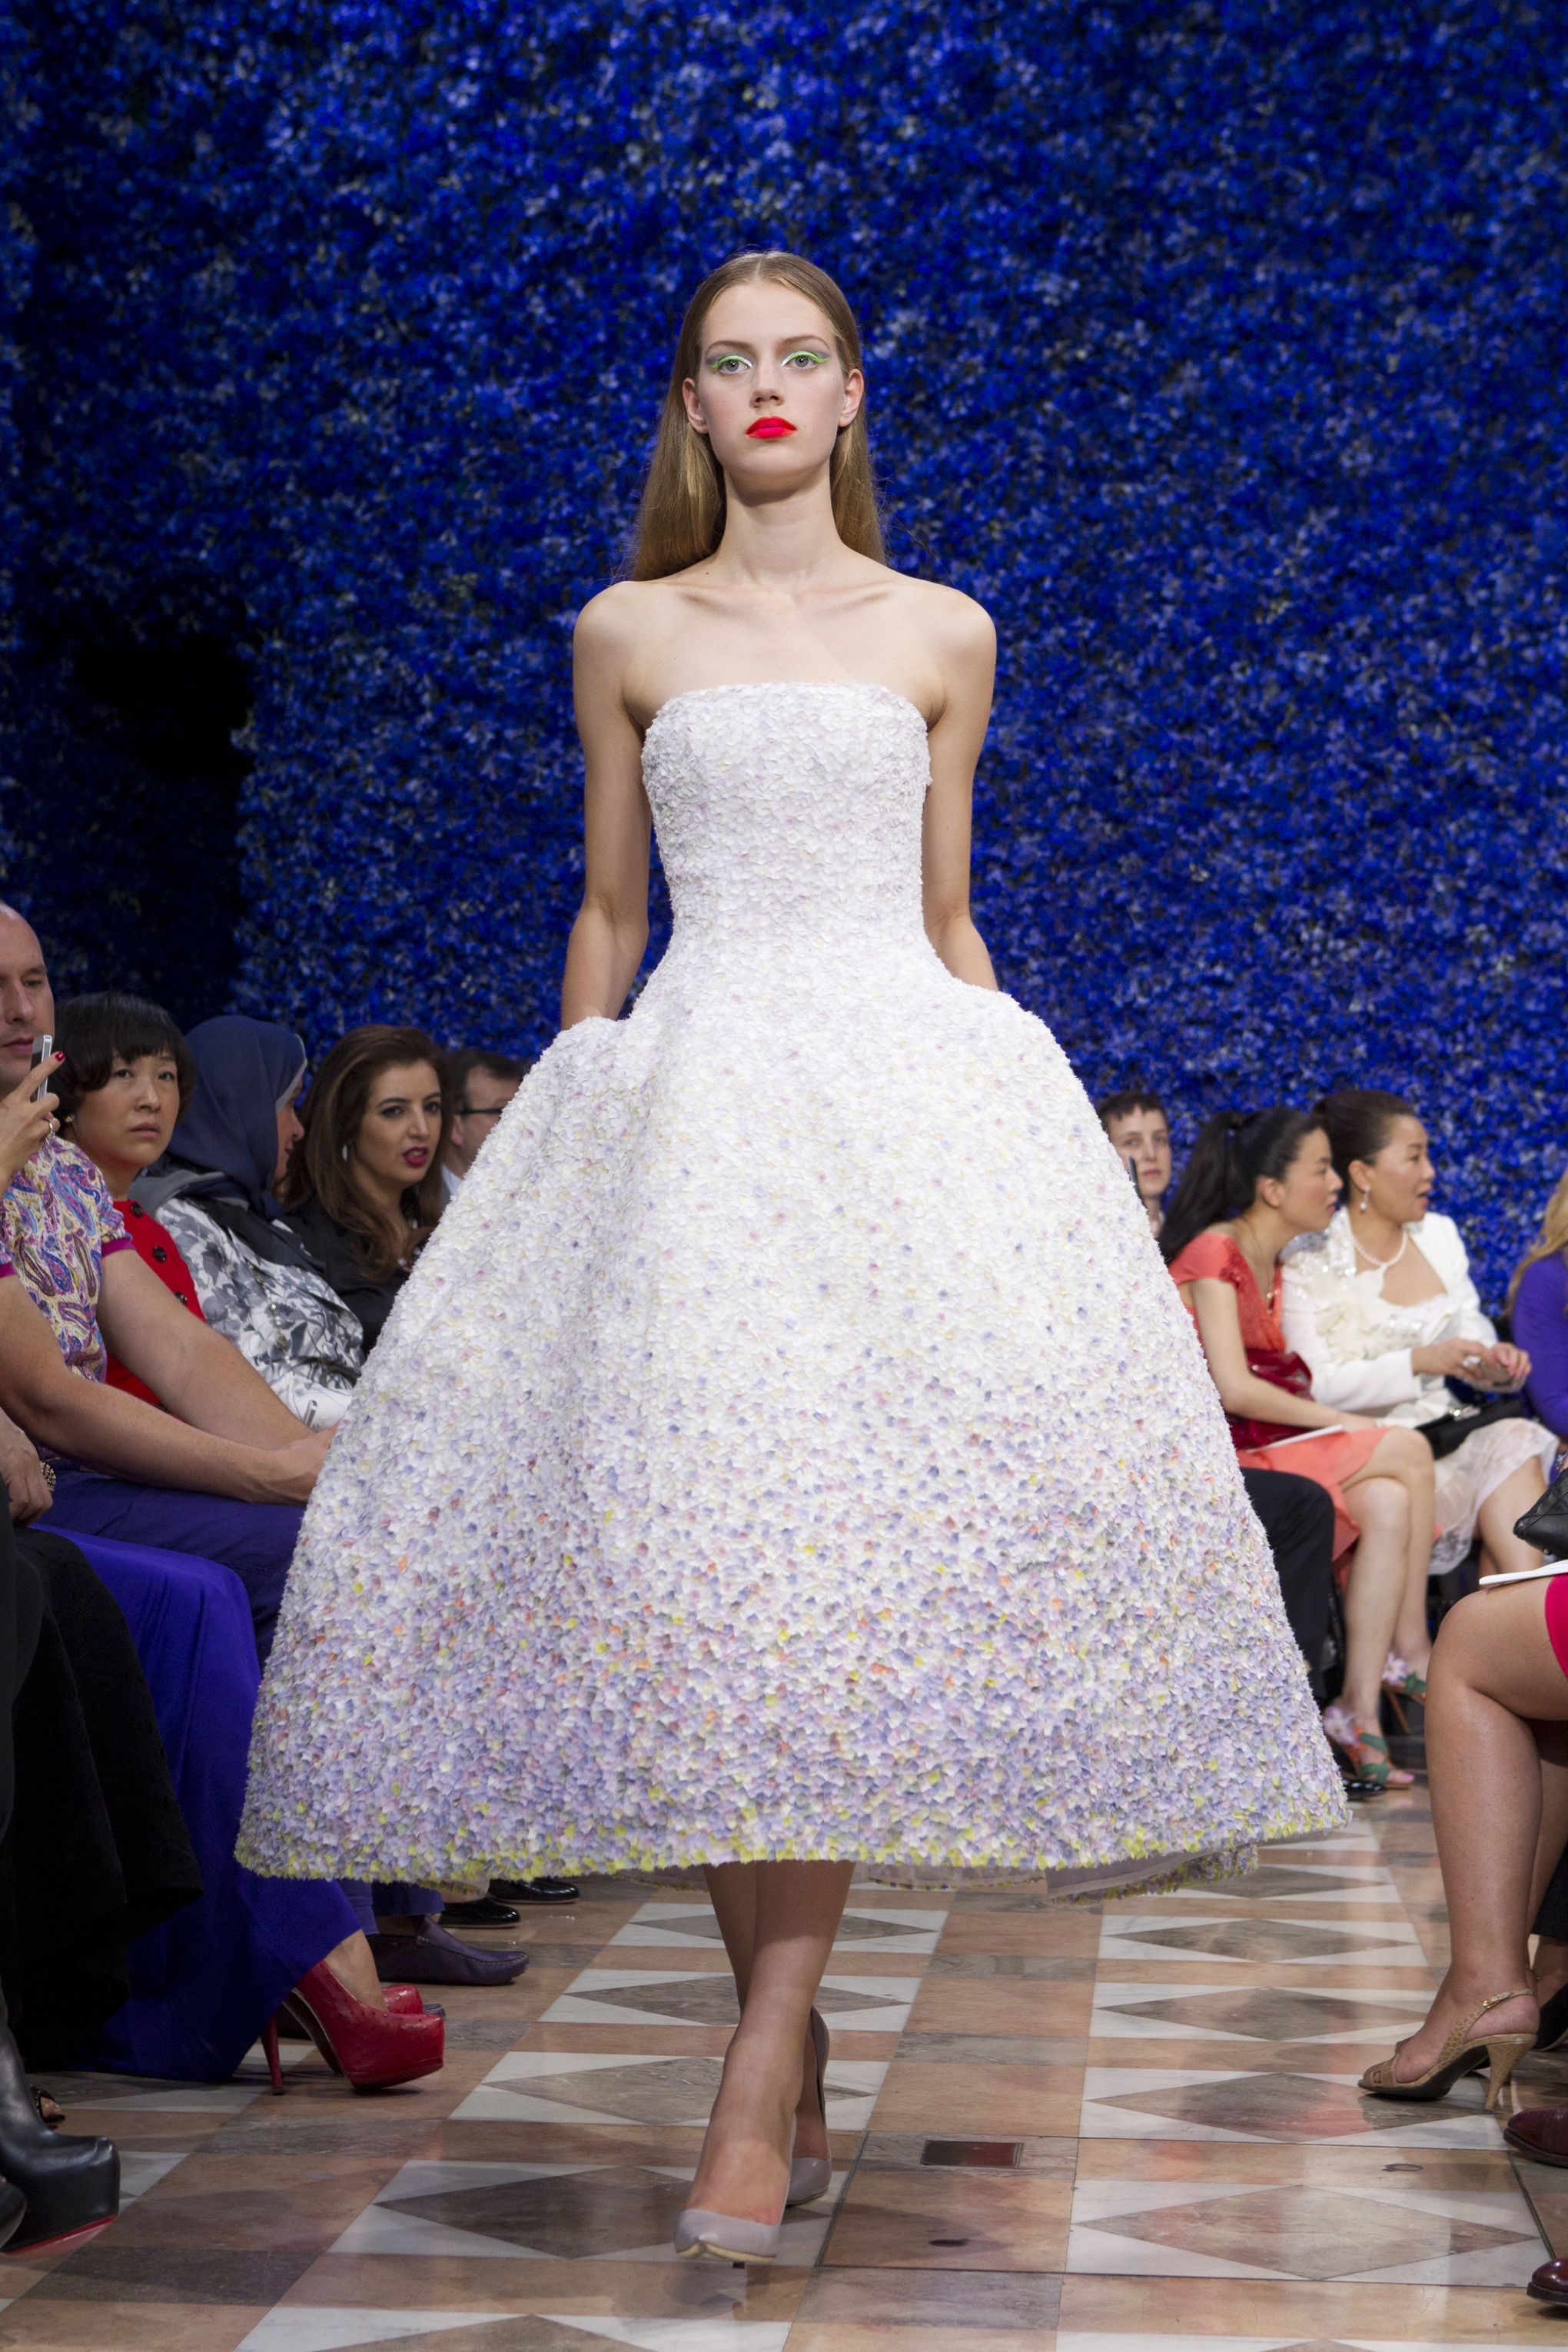 Dior looks back to move forward